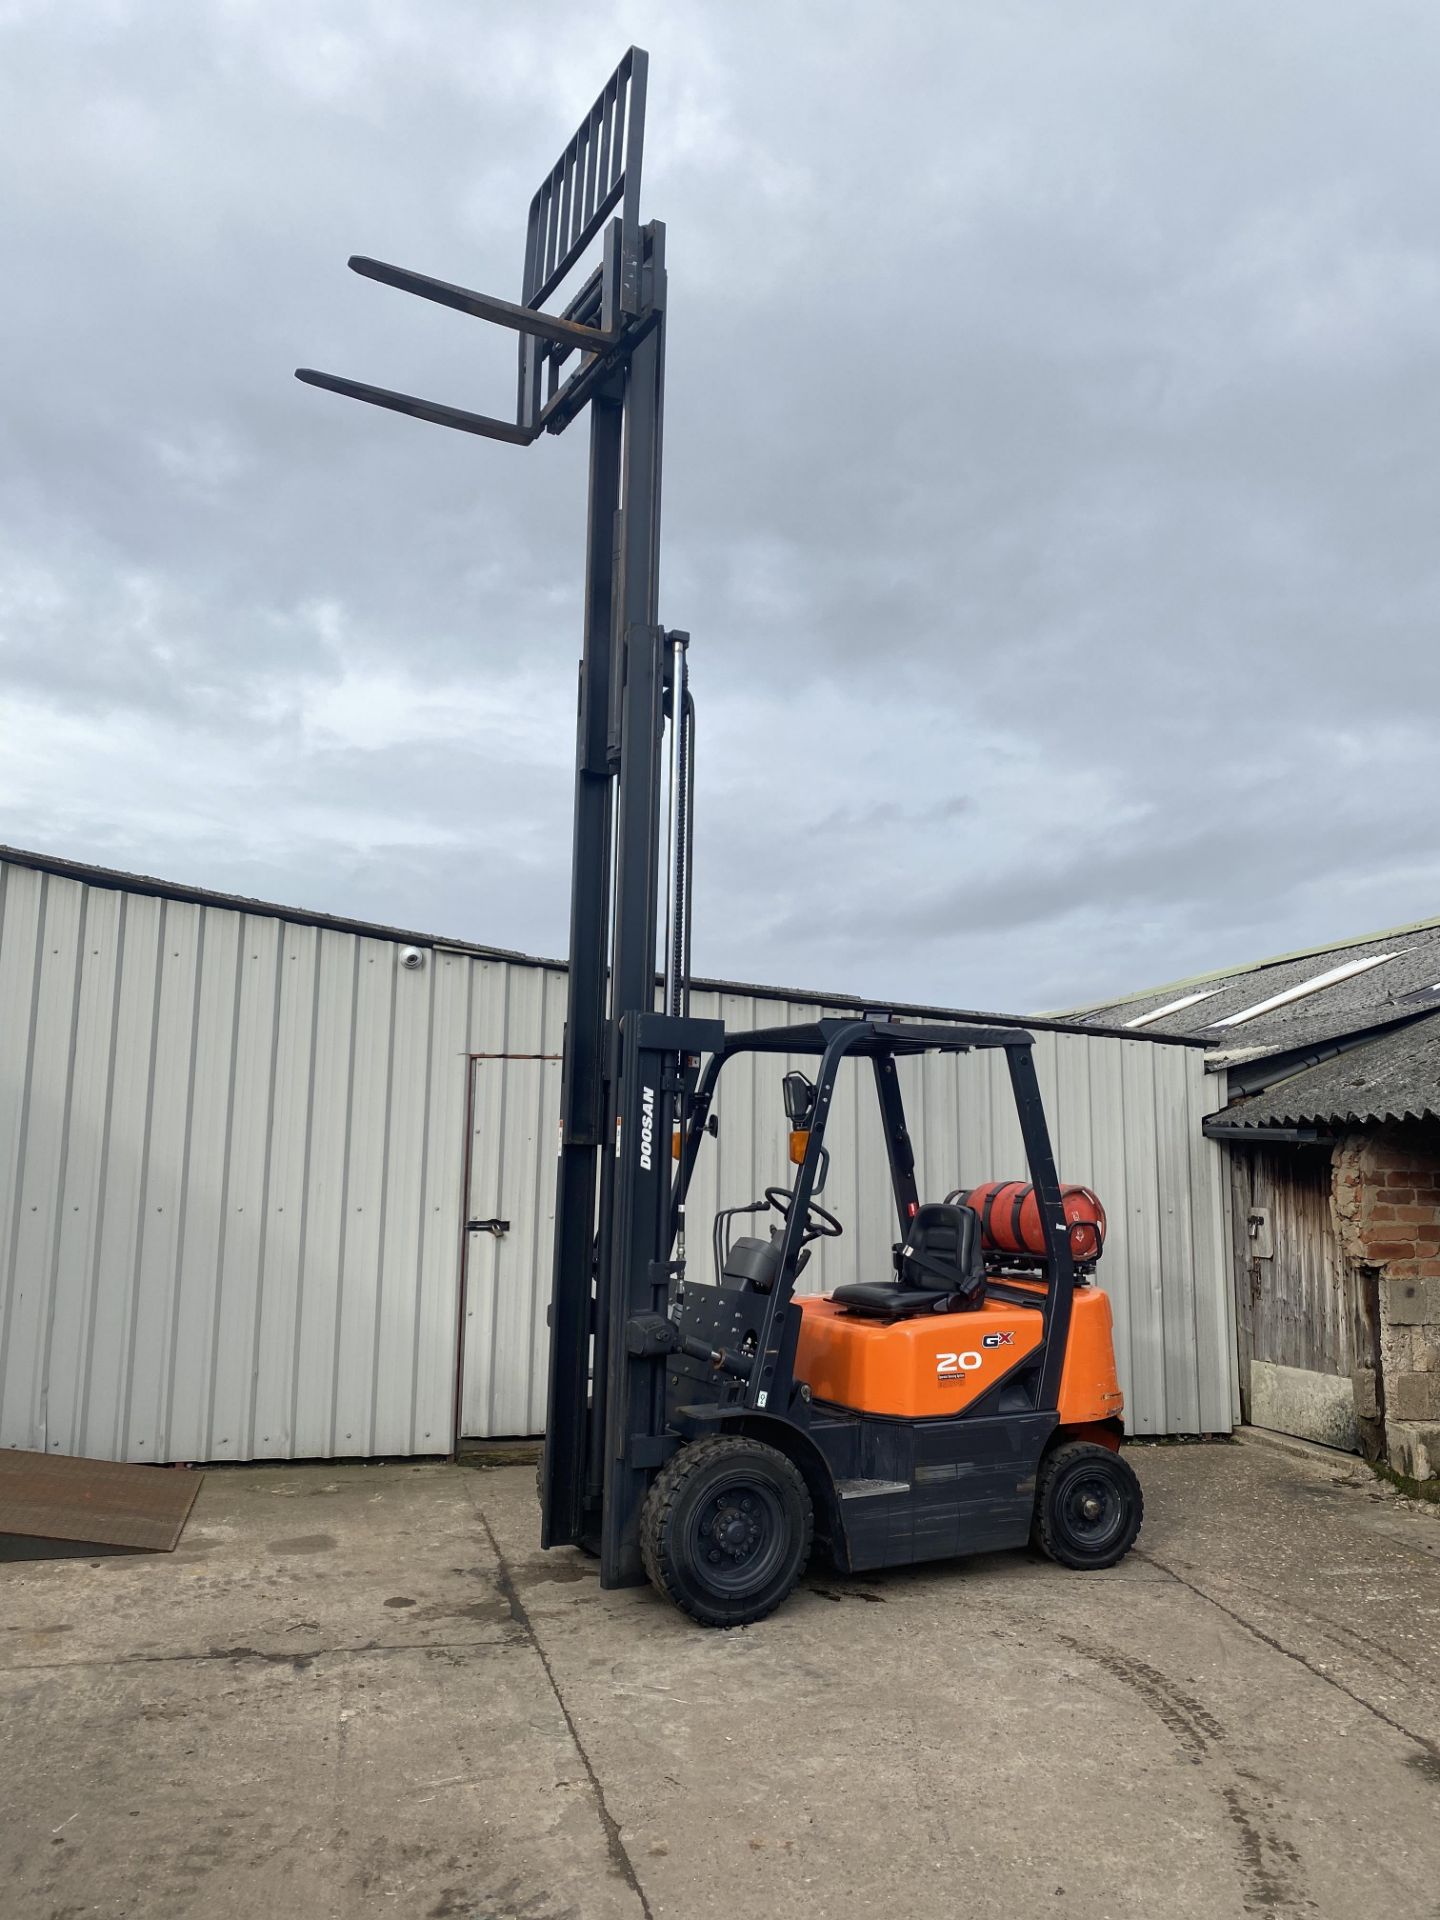 DOOSAN 2 TON GAS FORKLIFT, YEAR 2016, TRIPLE MAST, FREE LIFT, CONTAINER SPEC, SIDE SHIFT, 477 HOURS!